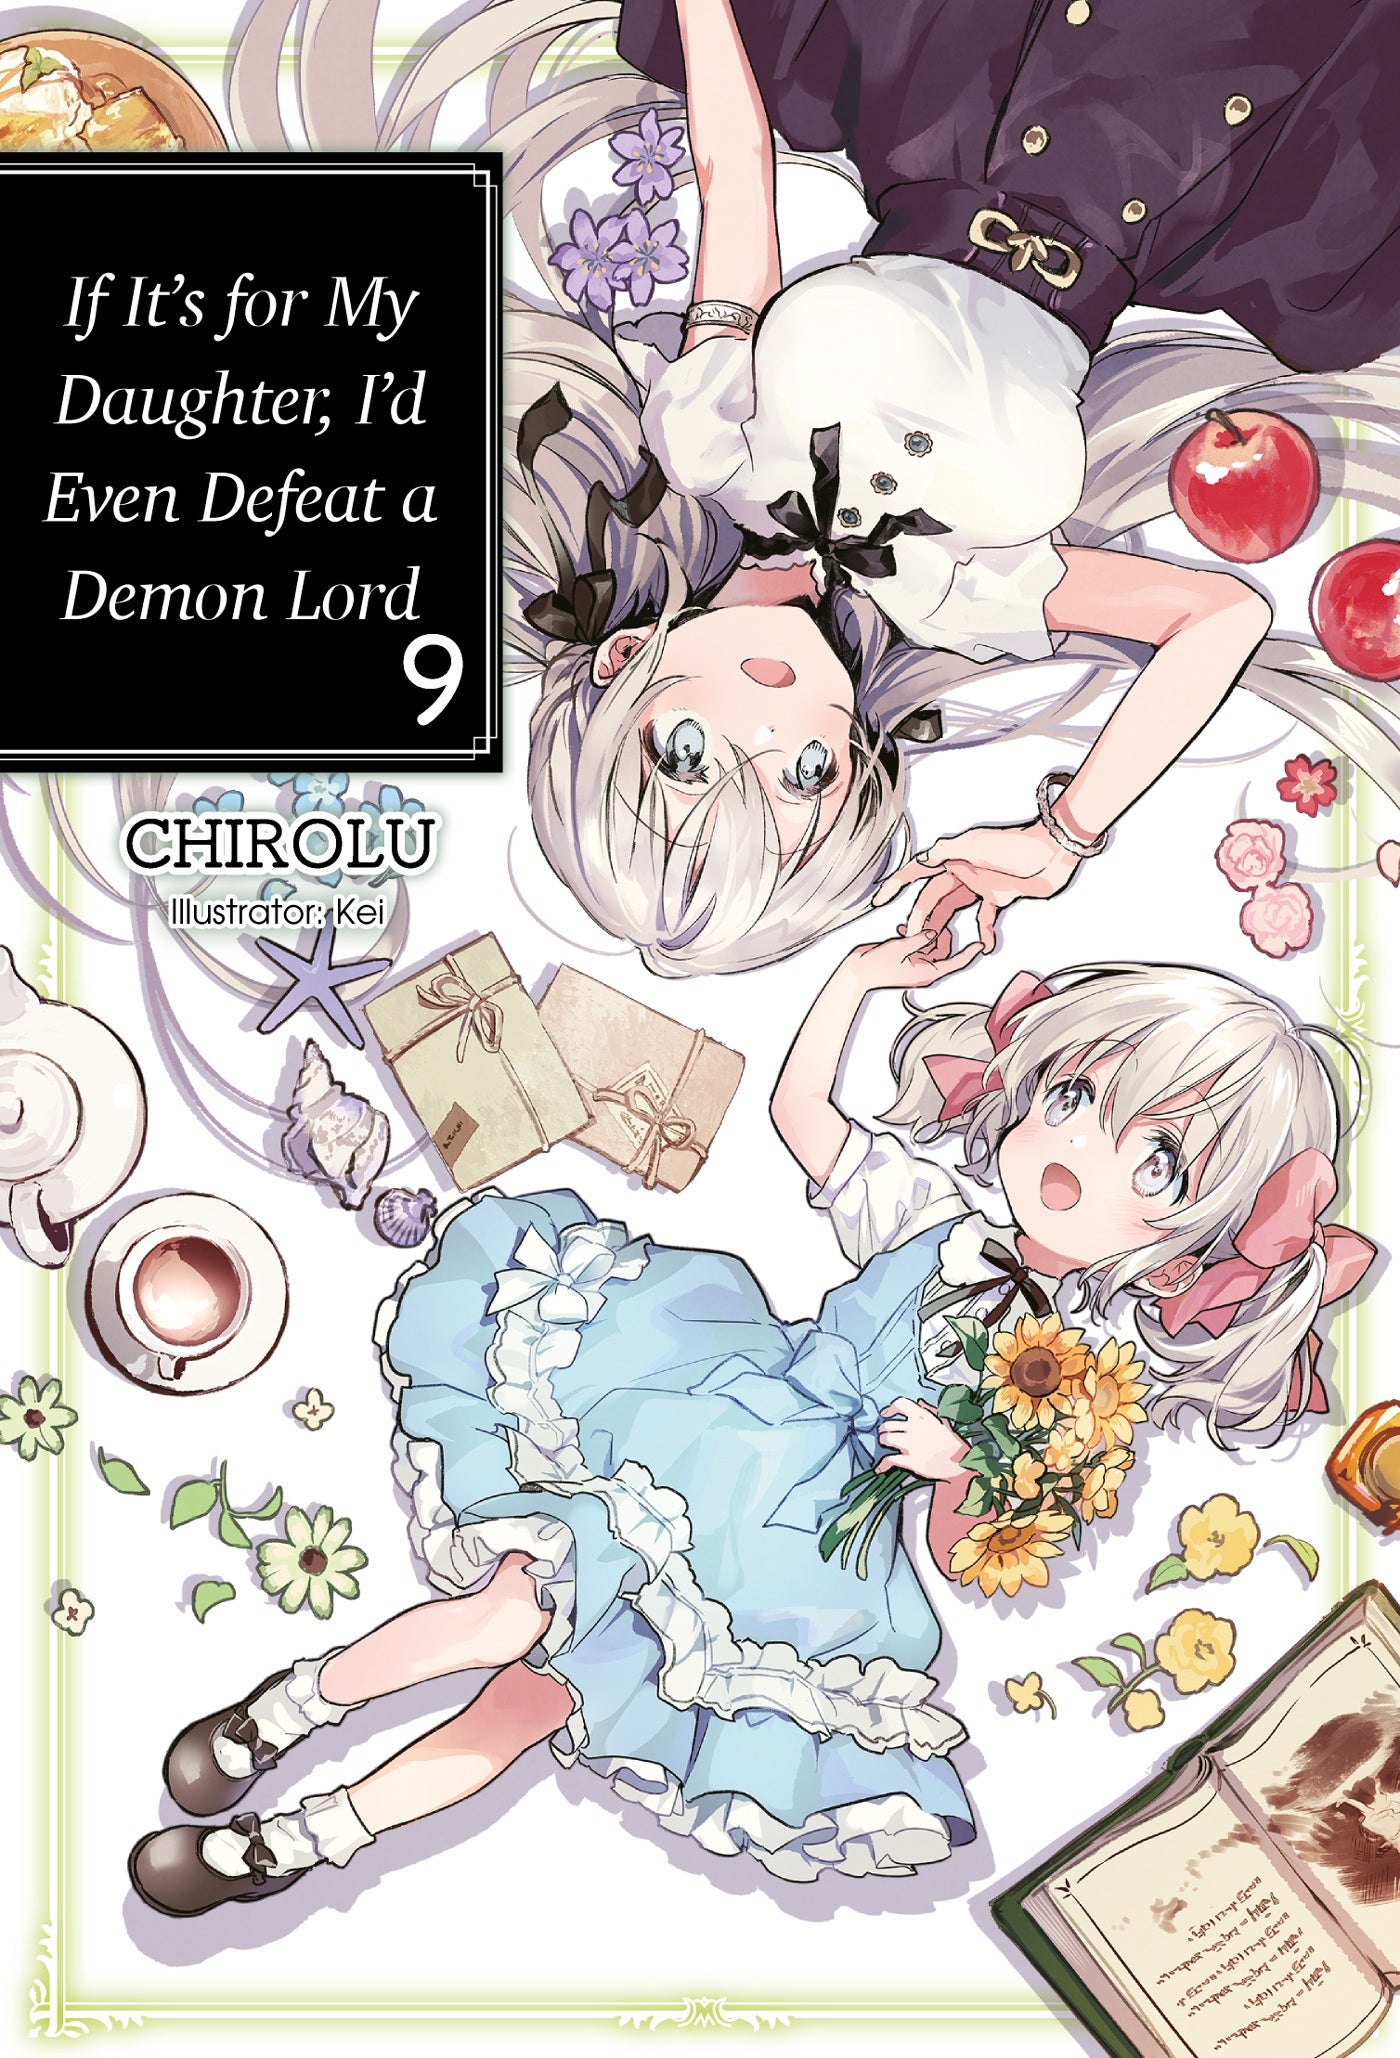 If It's for My Daughter, I'd Even Defeat a Demon Lord: Vol. 09 (Light Novel)